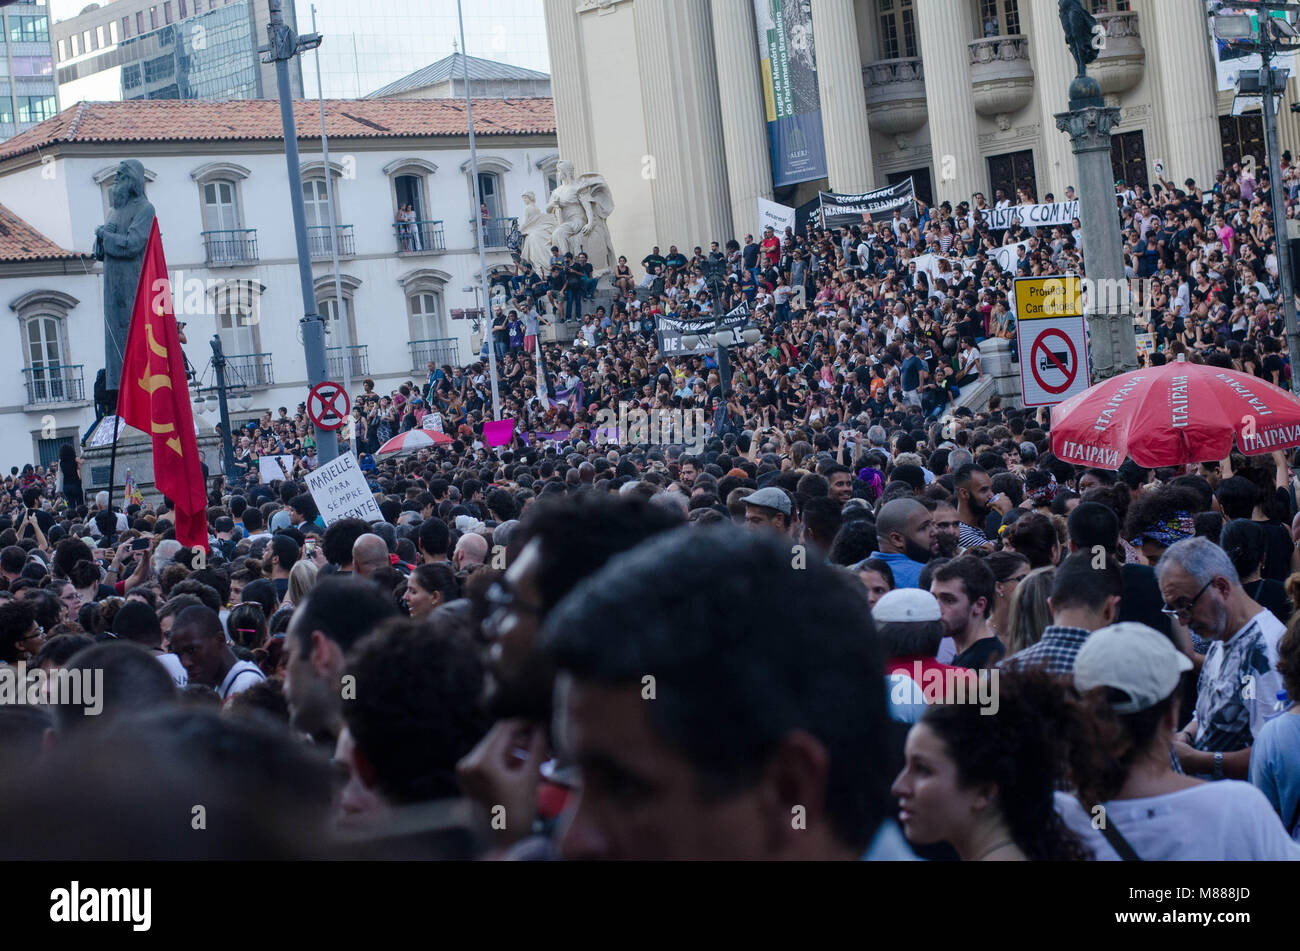 Mourners attend the funeral of slain Brazilian councilwoman and activist Marielle Franco, outside Rio de Janeiro's Municipal Chamber in Brazil on March 15, 2018. Brazilians mourned Thursday for a Rio de Janeiro councilwoman and outspoken critic of police brutality who was shot in the city center in an assassination-style killing on the eve. Some 1,000 people stood under the tropical sun outside City Hall to greet the coffin of Marielle Franco, 38, who was murdered late Wednesday. (PHOTO: VANESSA ATALIBA/BRAZIL PHOTO PRESS) Stock Photo